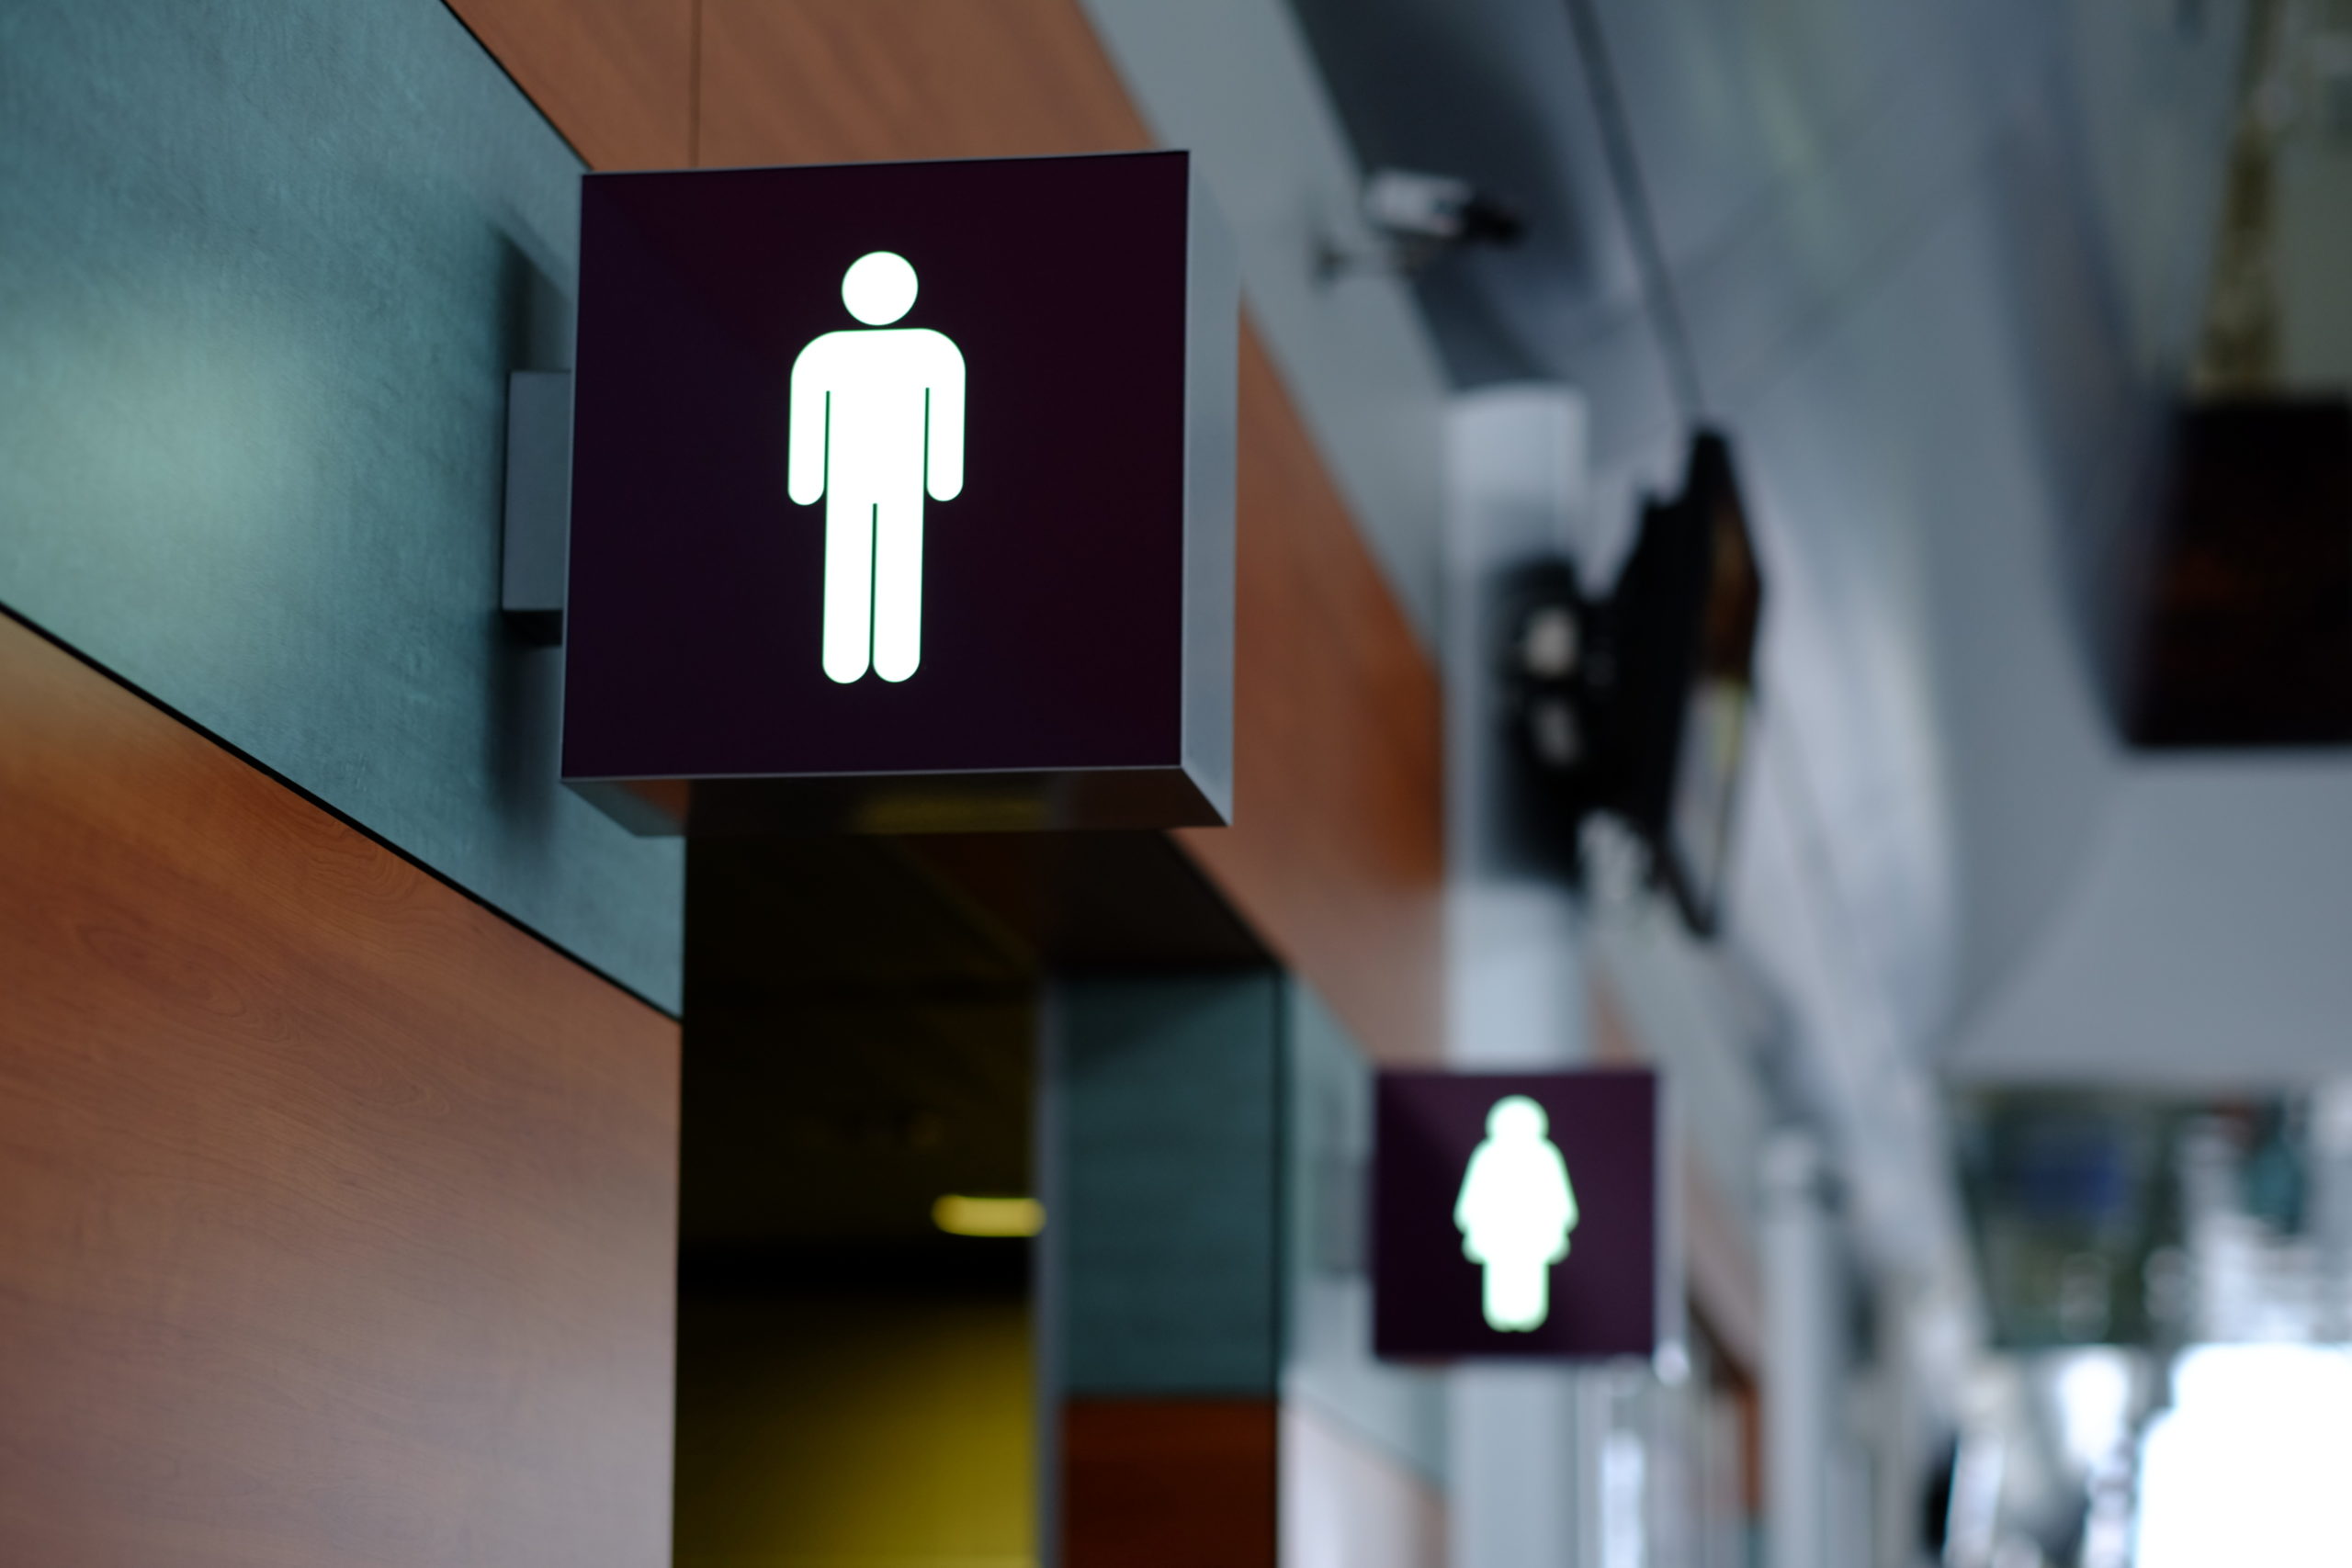 Overdose-Resistant Restrooms Are Being Developed